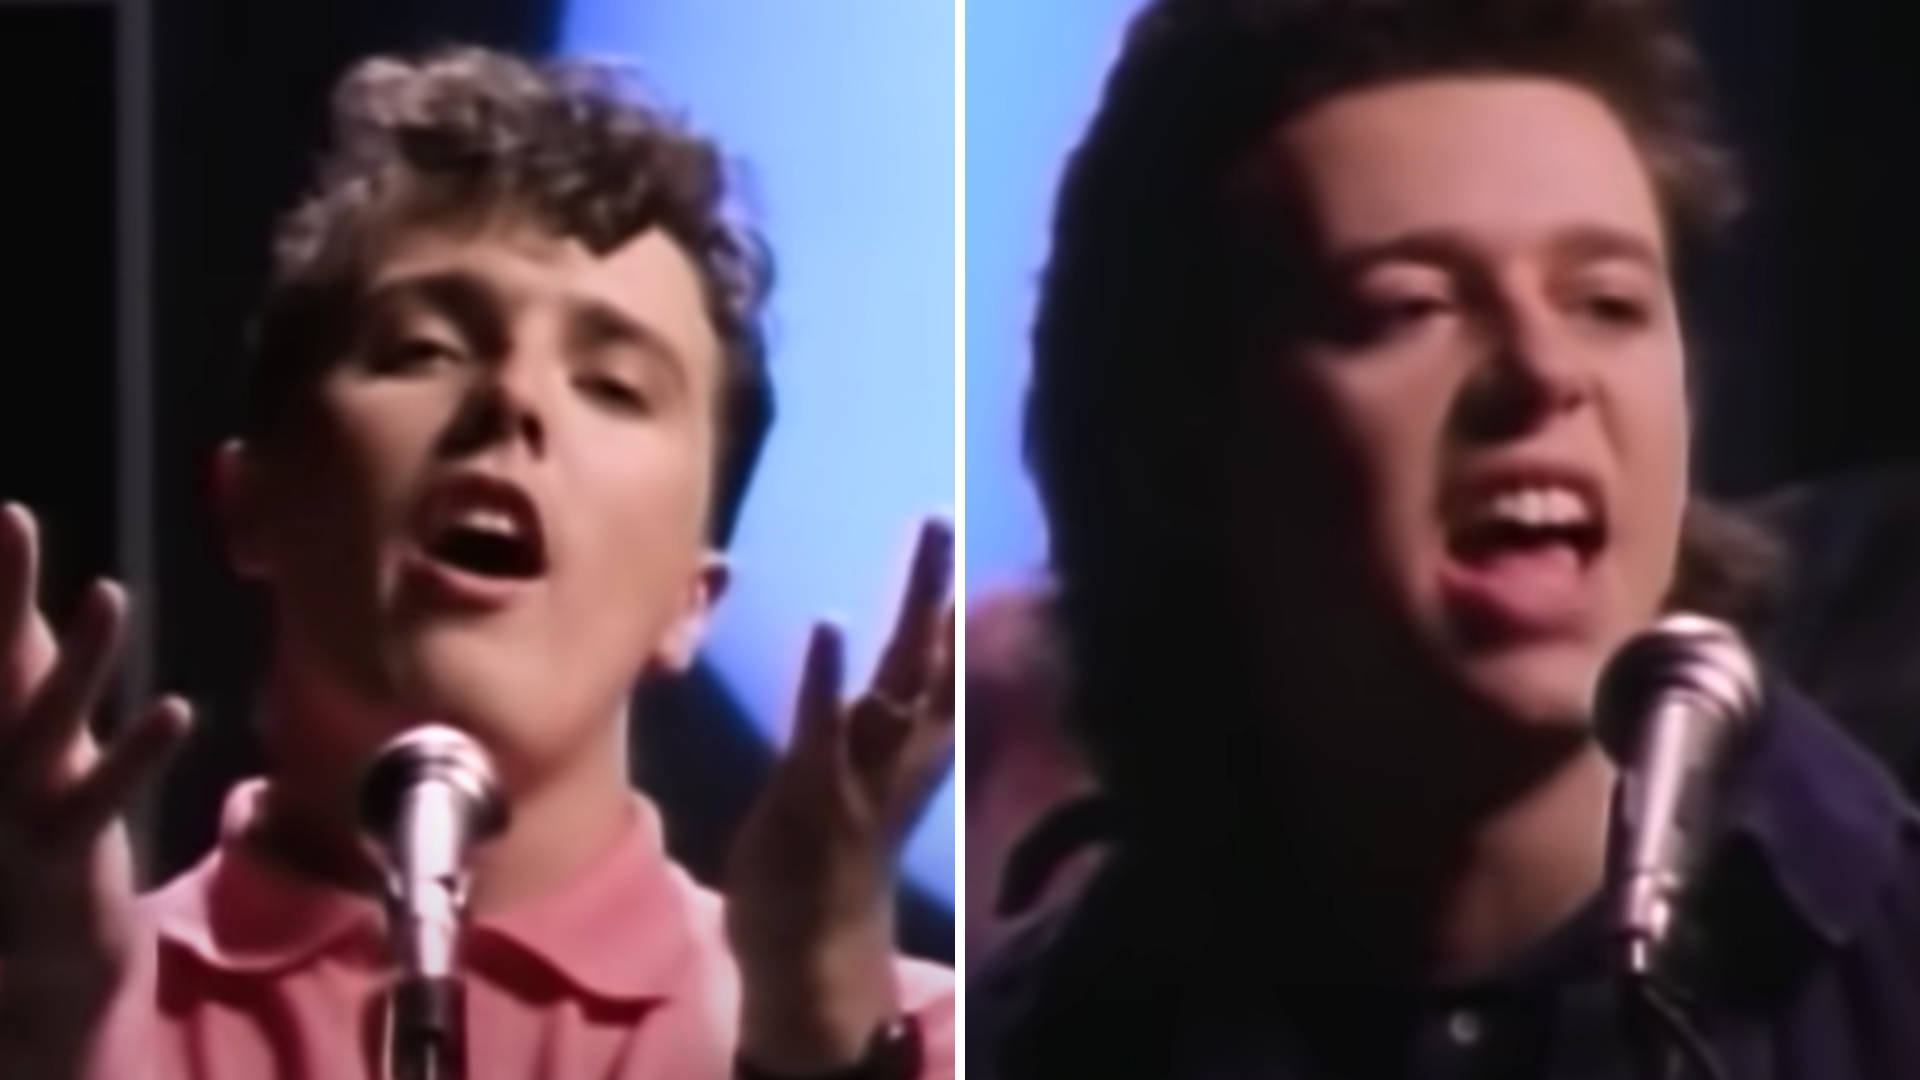 The Story of 'Everybody Wants to Rule the World' by Tears for Fears -  Smooth